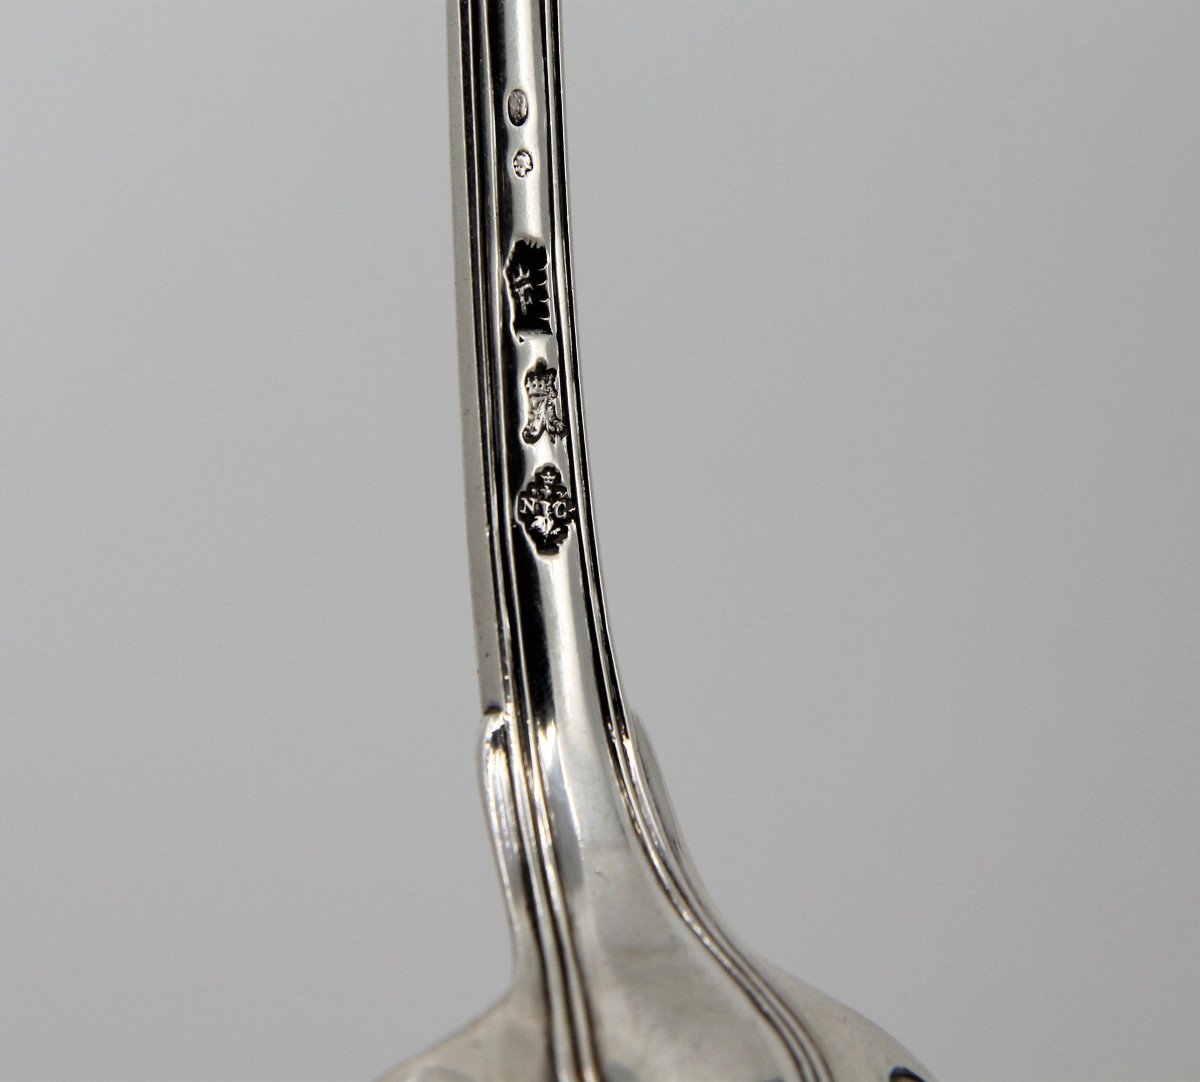 Suger Spoon, Nicolas Collier, Paris 1769. Spoon Published In Gruber 1982-photo-2